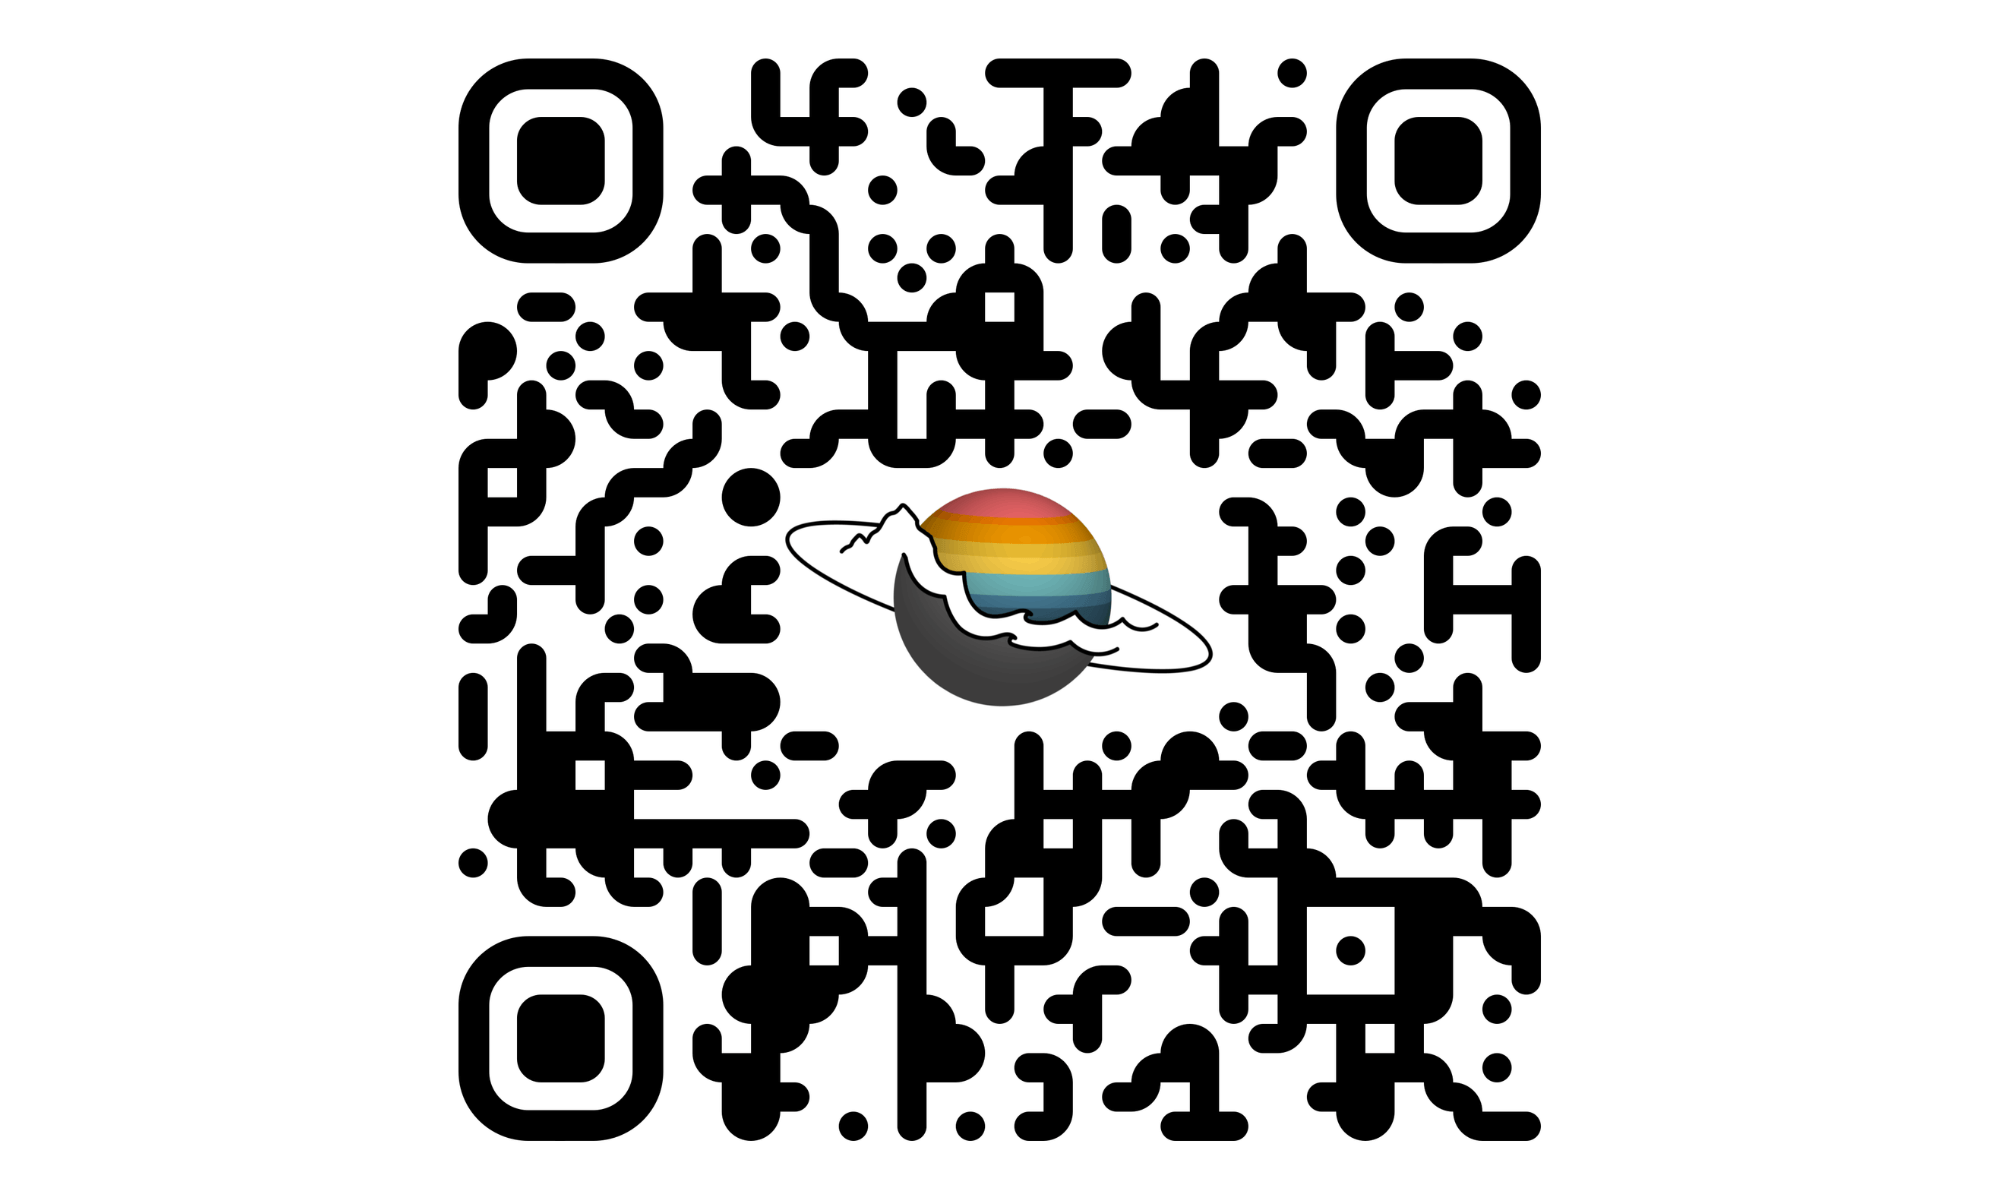 QR codes can strategically bridge the gap between offline & online media: operating as vehicles to engage customers, inspire action, drive traffic, and share information without having to invest a lot of money.